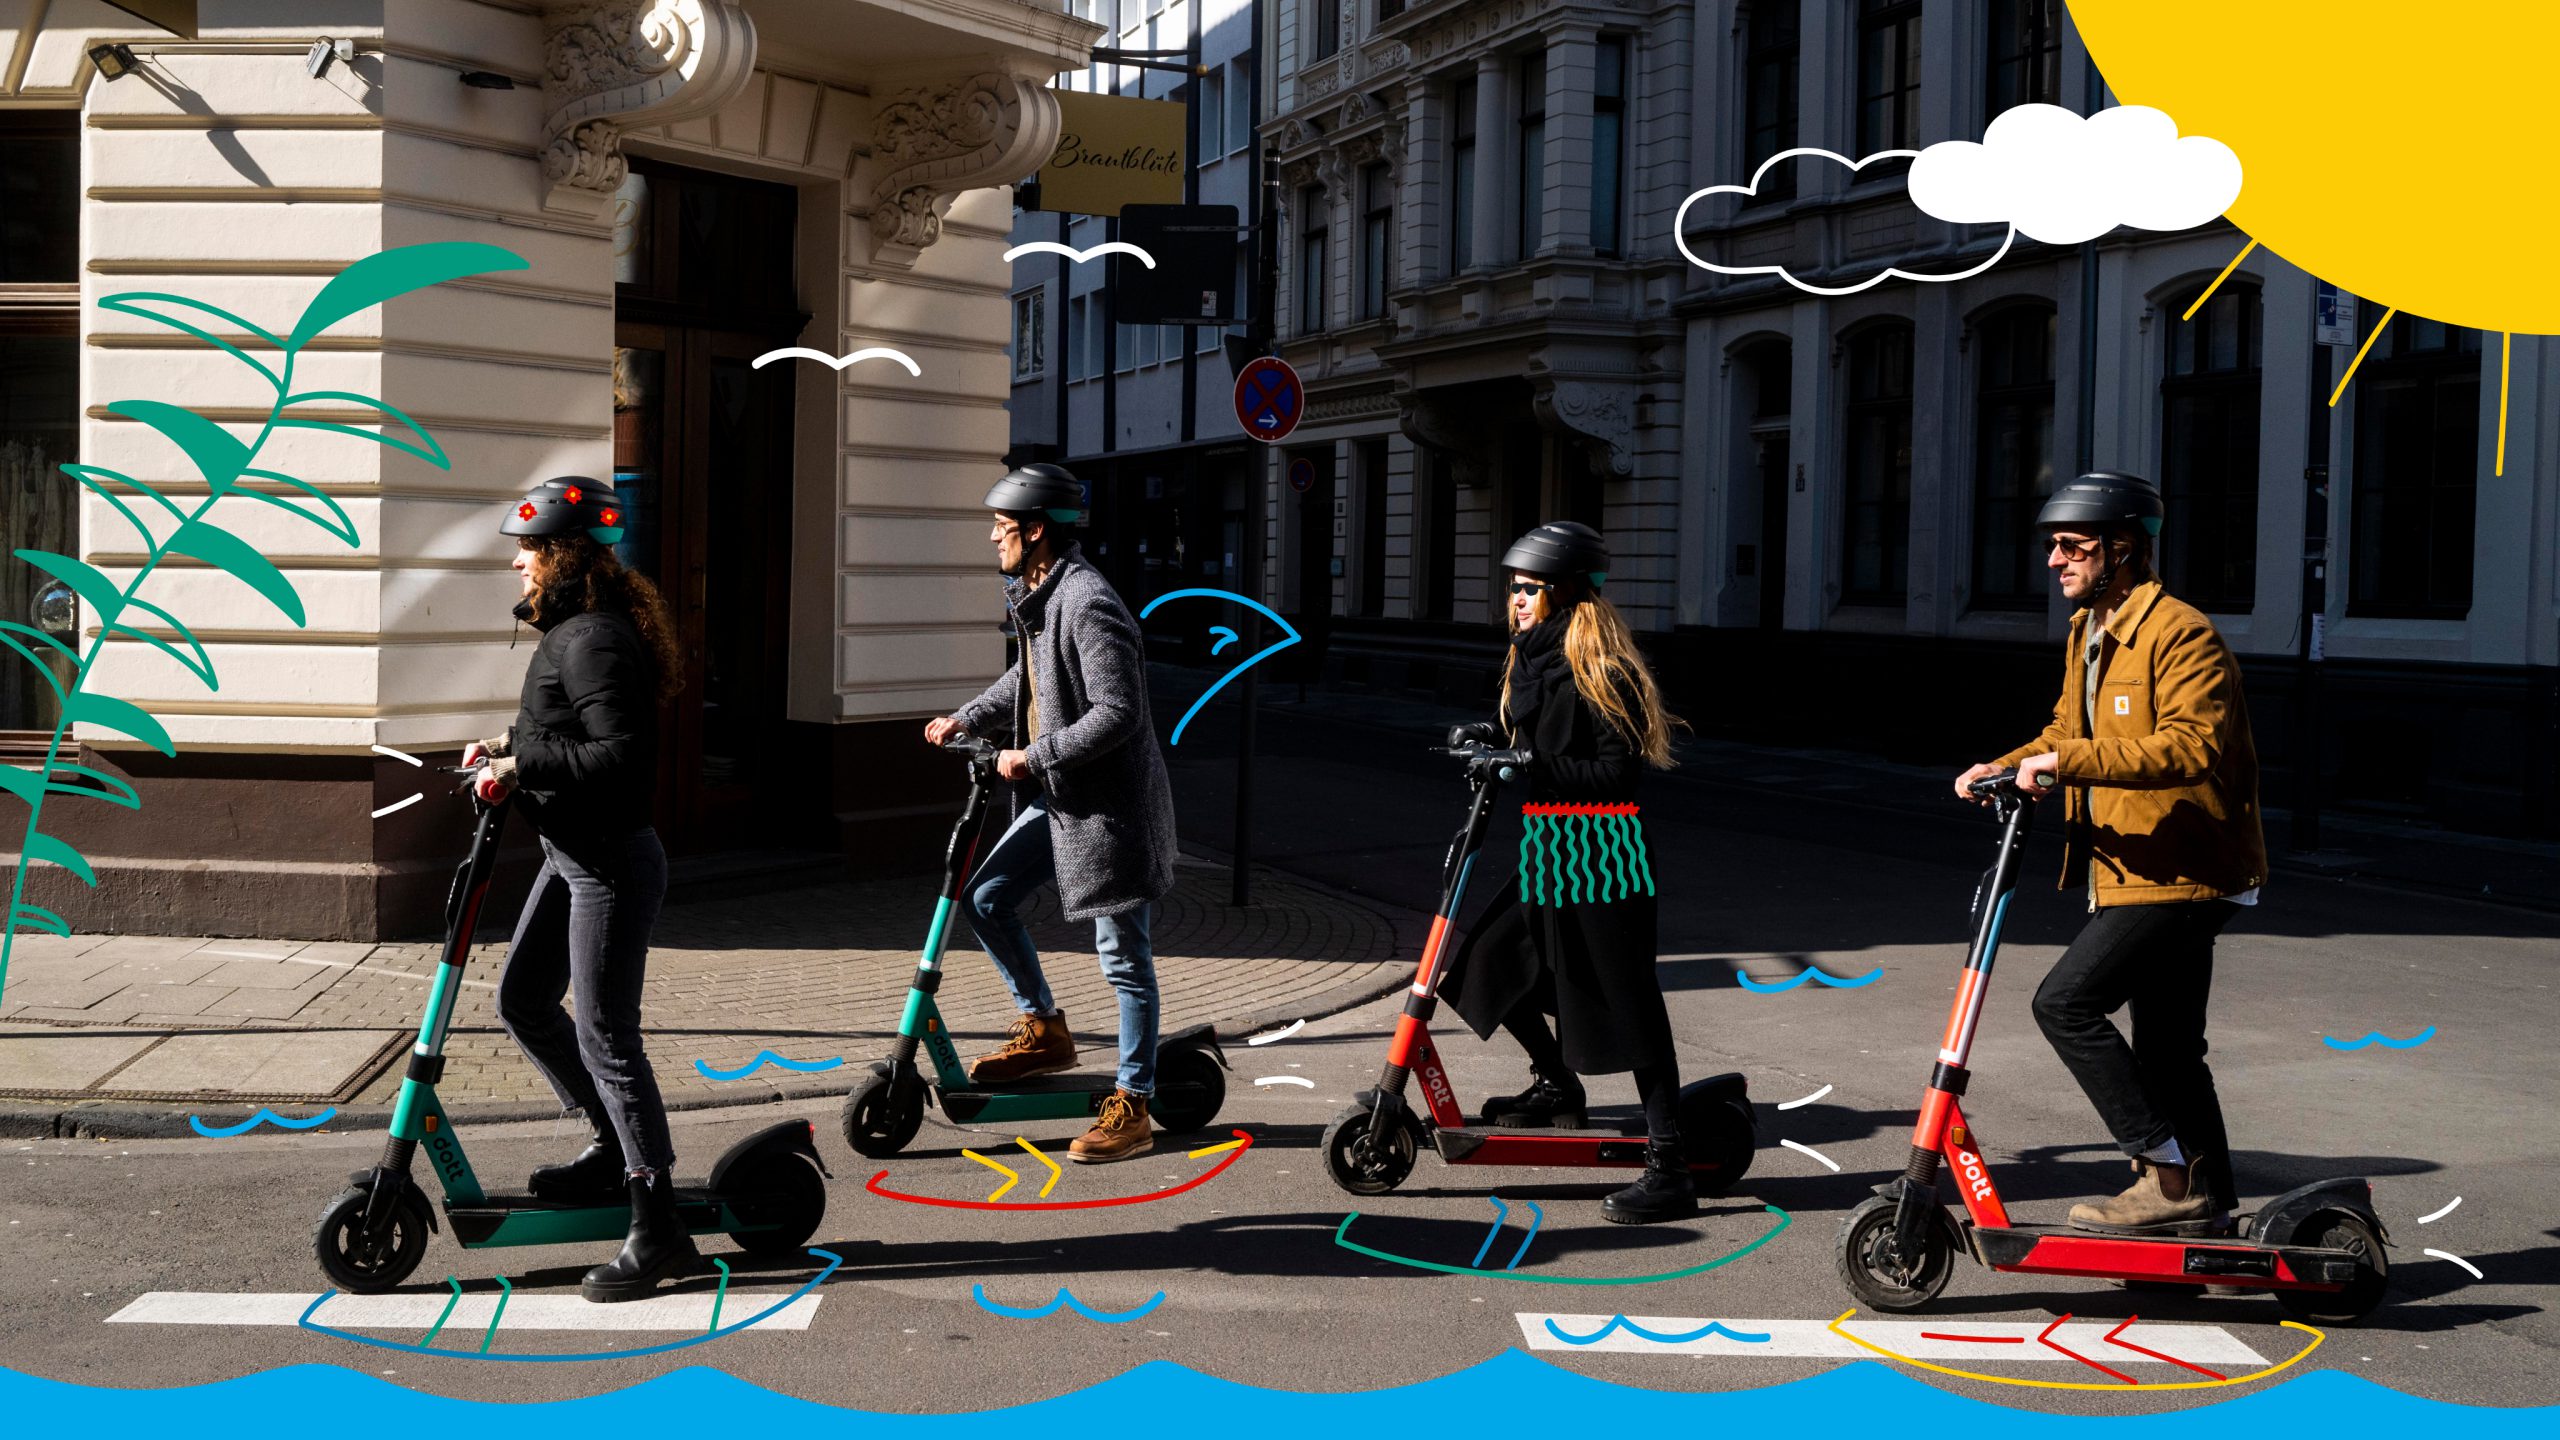 Four young people ride Dotts in a line on a city street. The image has playful, colourful doodles to suggest a seaside vibe, such as surfboards under the e-scooters, waves on the road and flowers in the helmets.